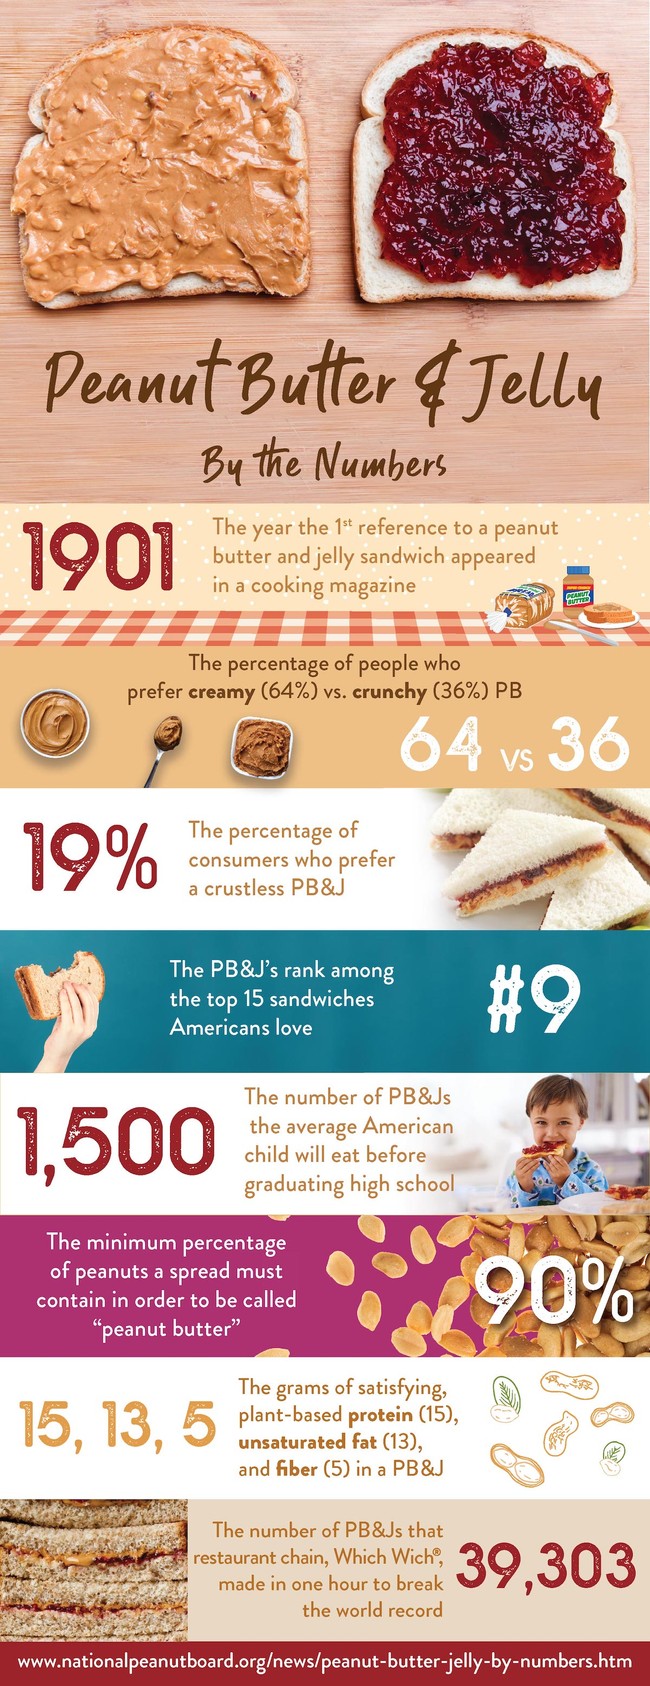 infographic about peanut butter & jelly by the numbers